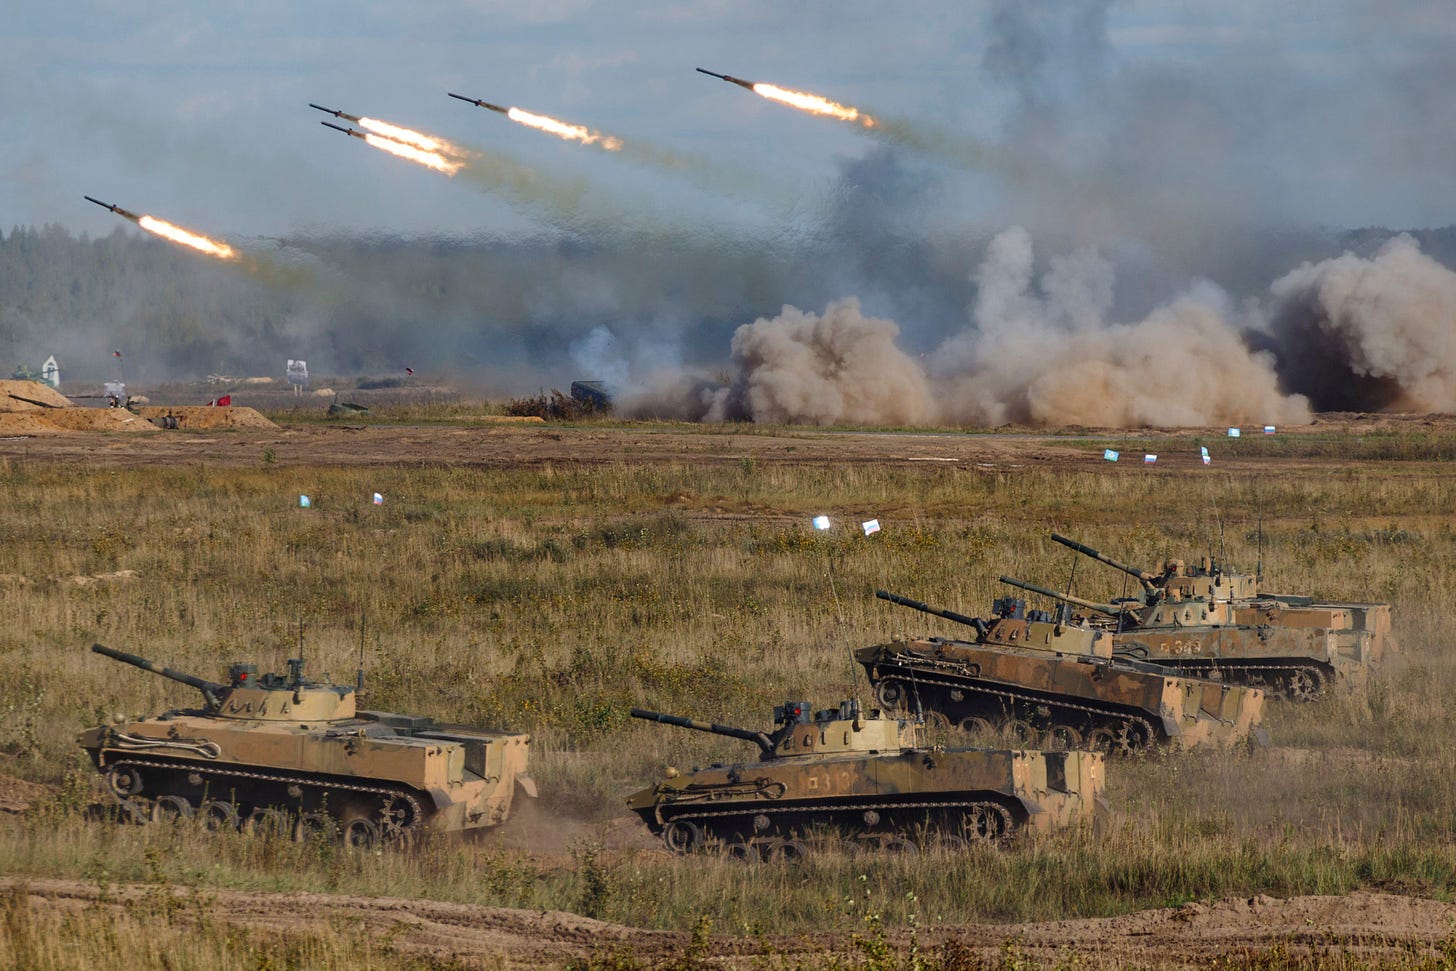 Russians have 120,000 troops on its border, increased intel gathering,  Ukraine ministry says